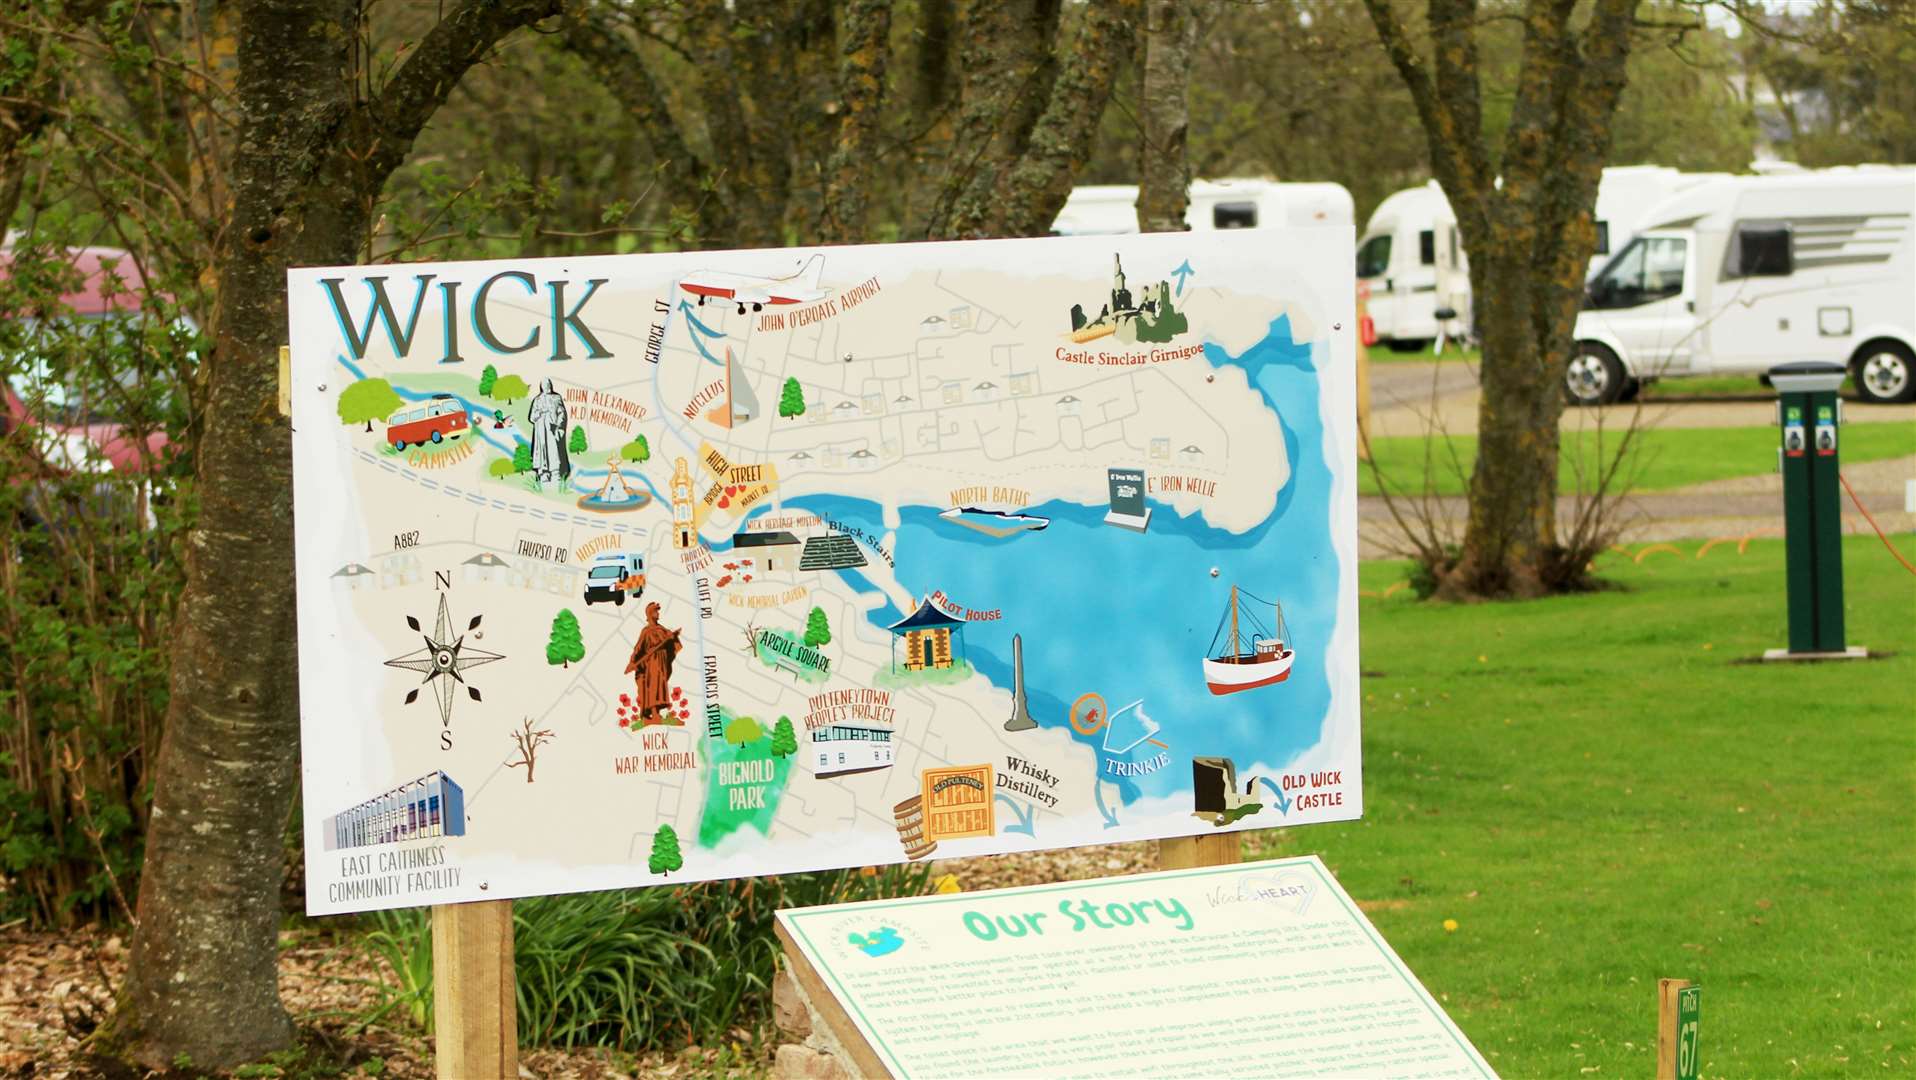 Wick River Campsite is set for a 'really positive' season with 1850 bookings so far. Picture: Alan Hendry